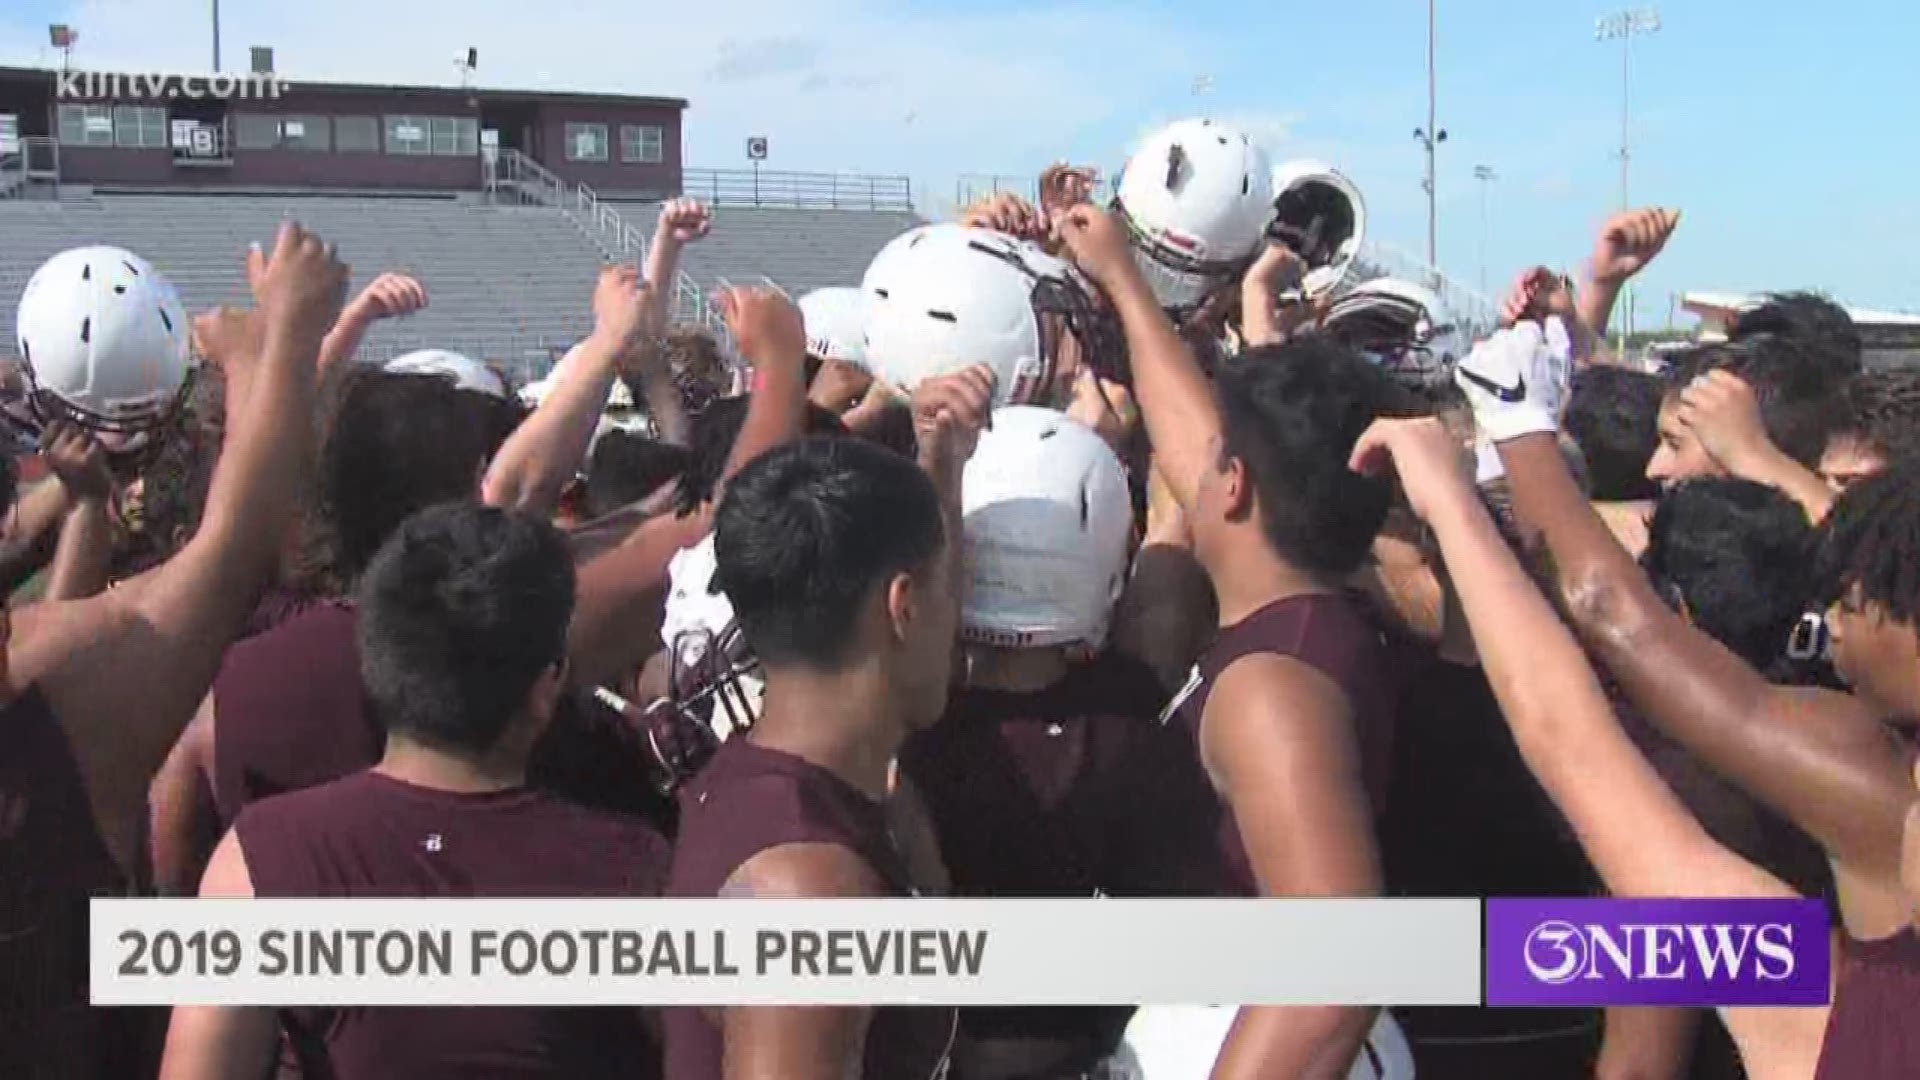 A new season and a new face out in Sinton, America this football season. Michael Troutman returns to his alma mater after being hired as the new AD/head coach.